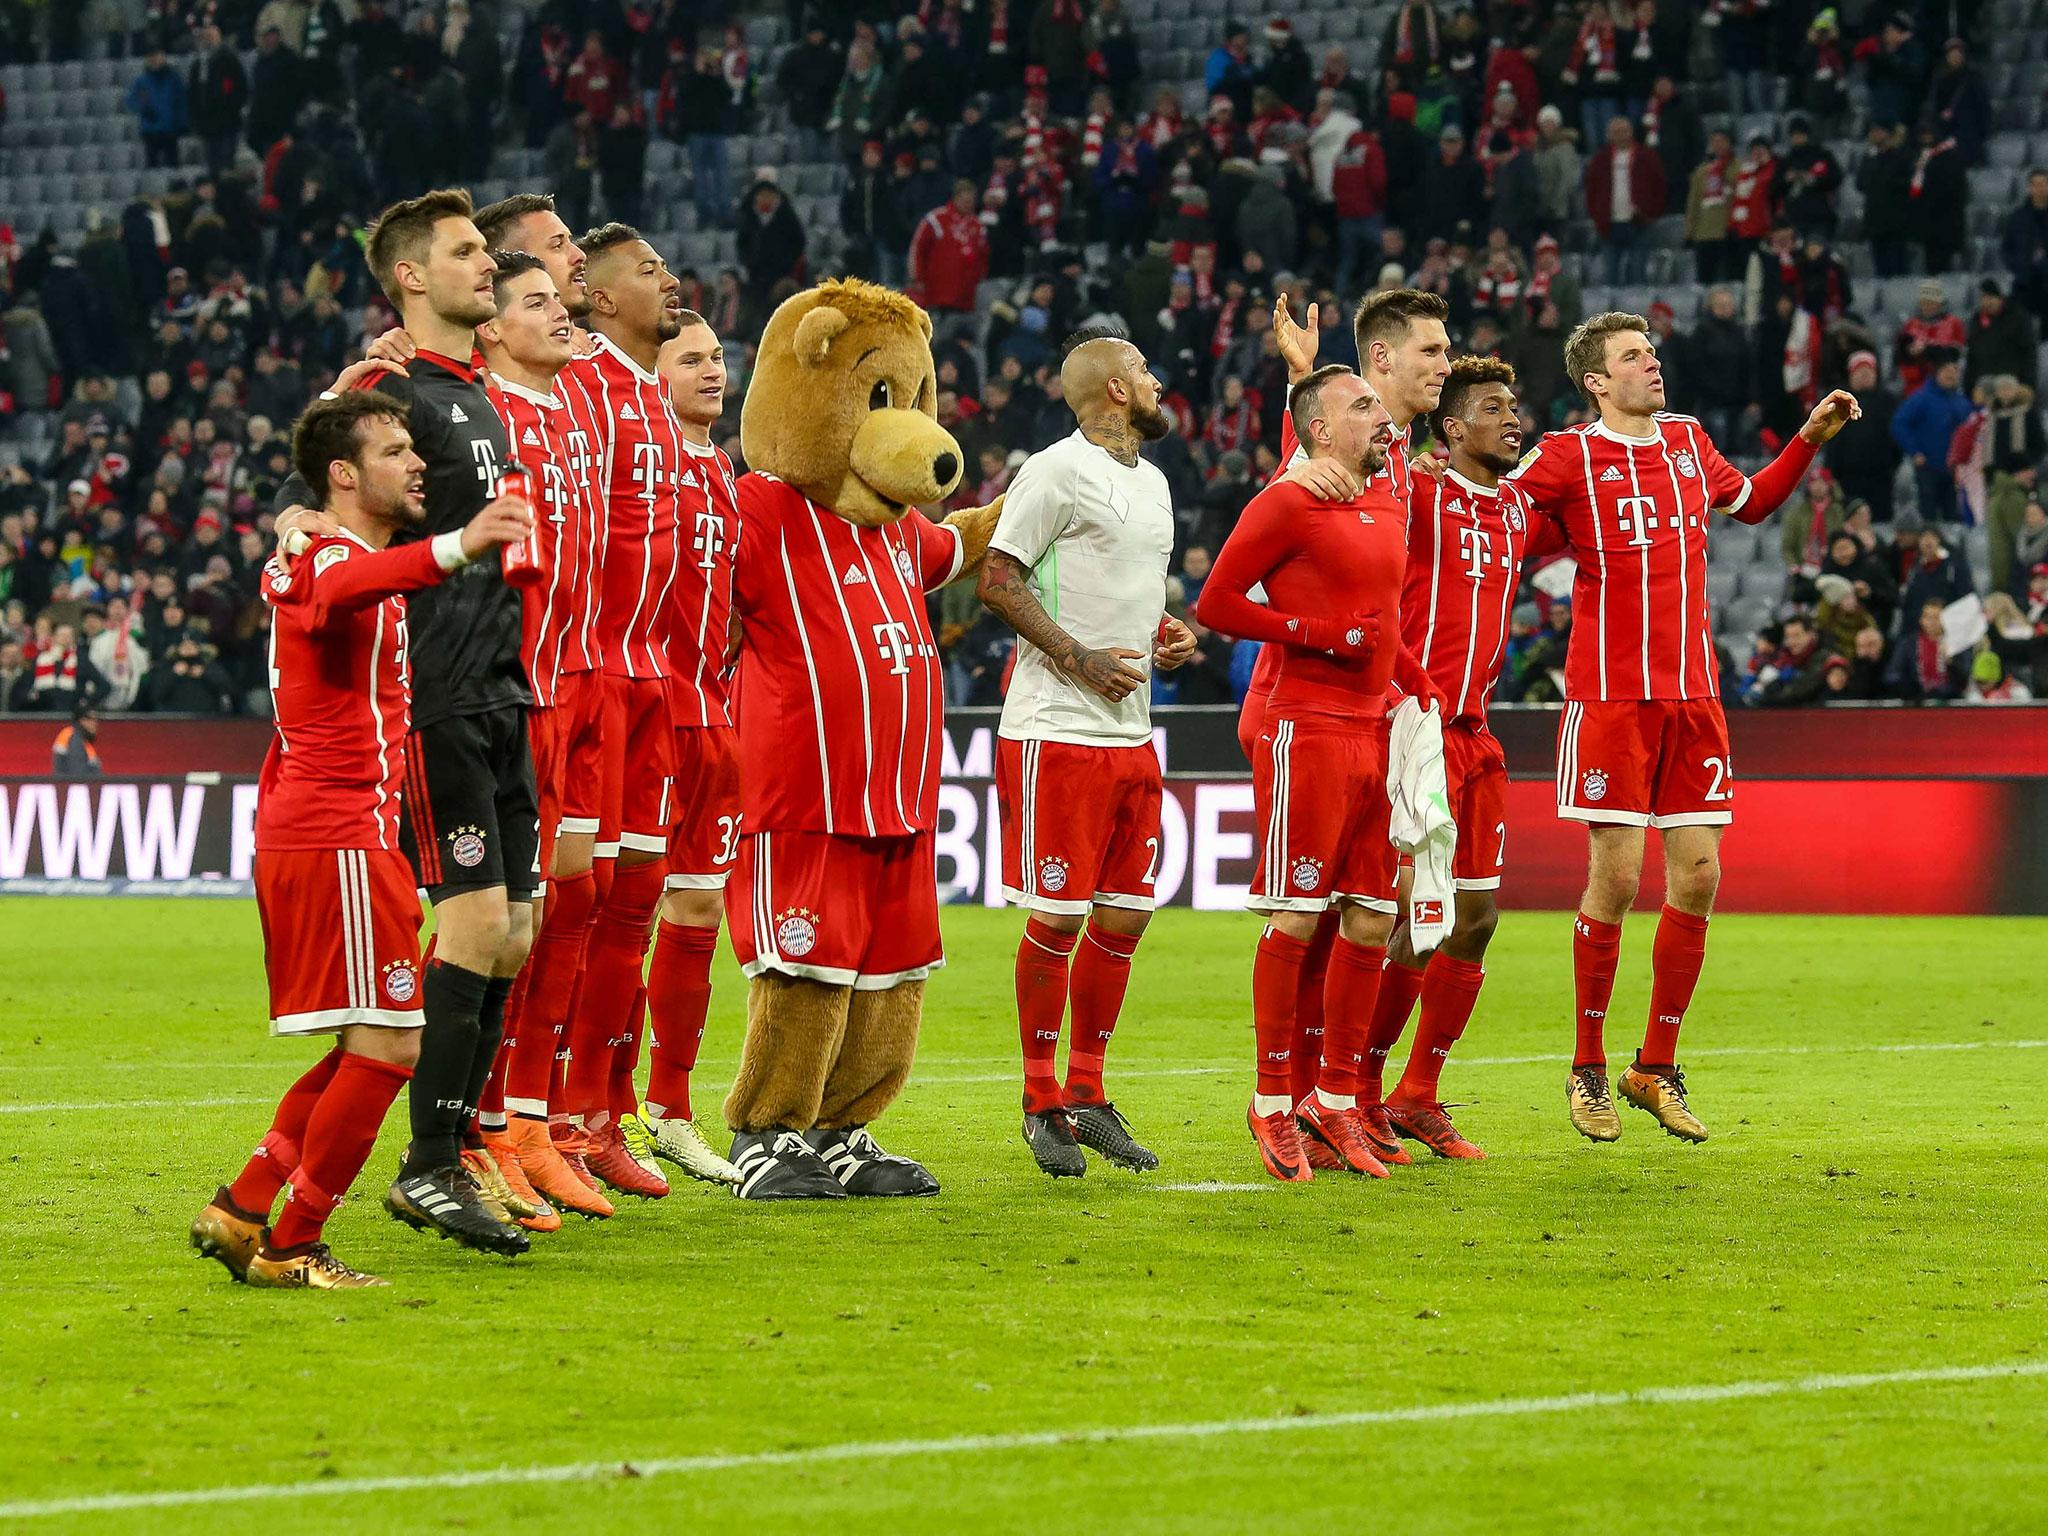 Bayern have gone back to basics with a tried and tested method of signing young German players